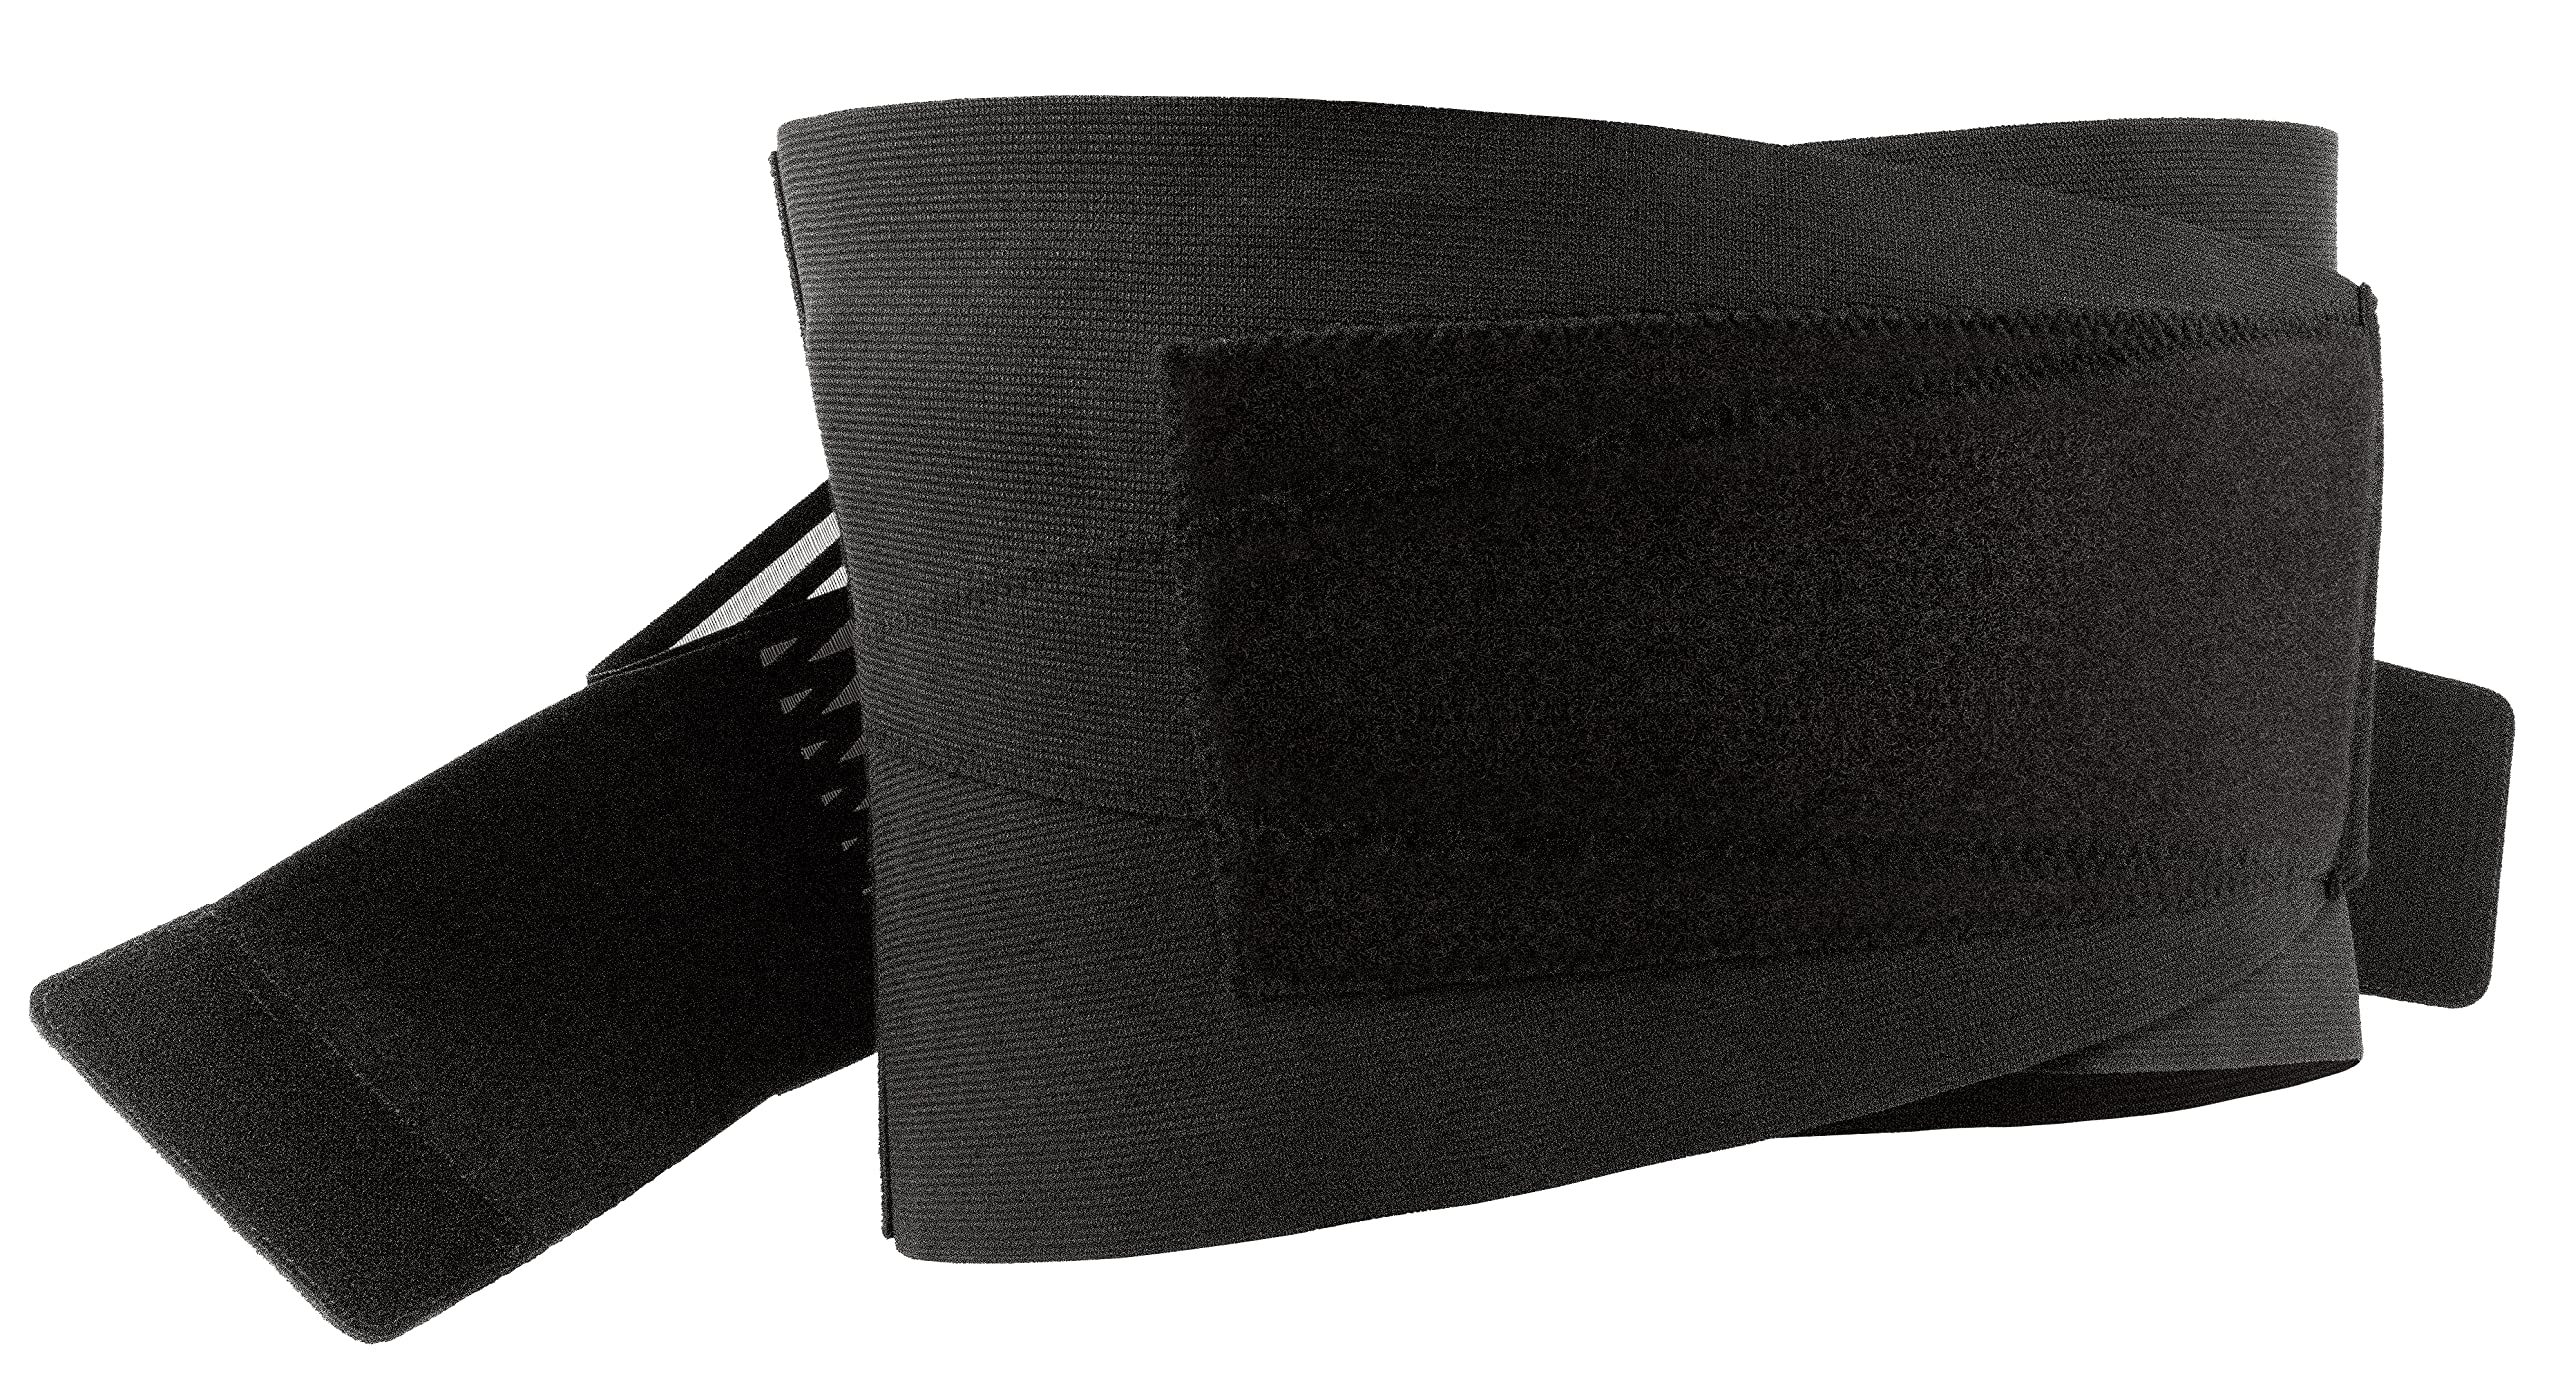 Mueller Sports Medicine 4-in-1 Lumbar Support Back Brace, Men and Women, Adjustable Lower Waist Belt, Back Pain Relief from Soreness, Fatigue, or Injury, Black, Small